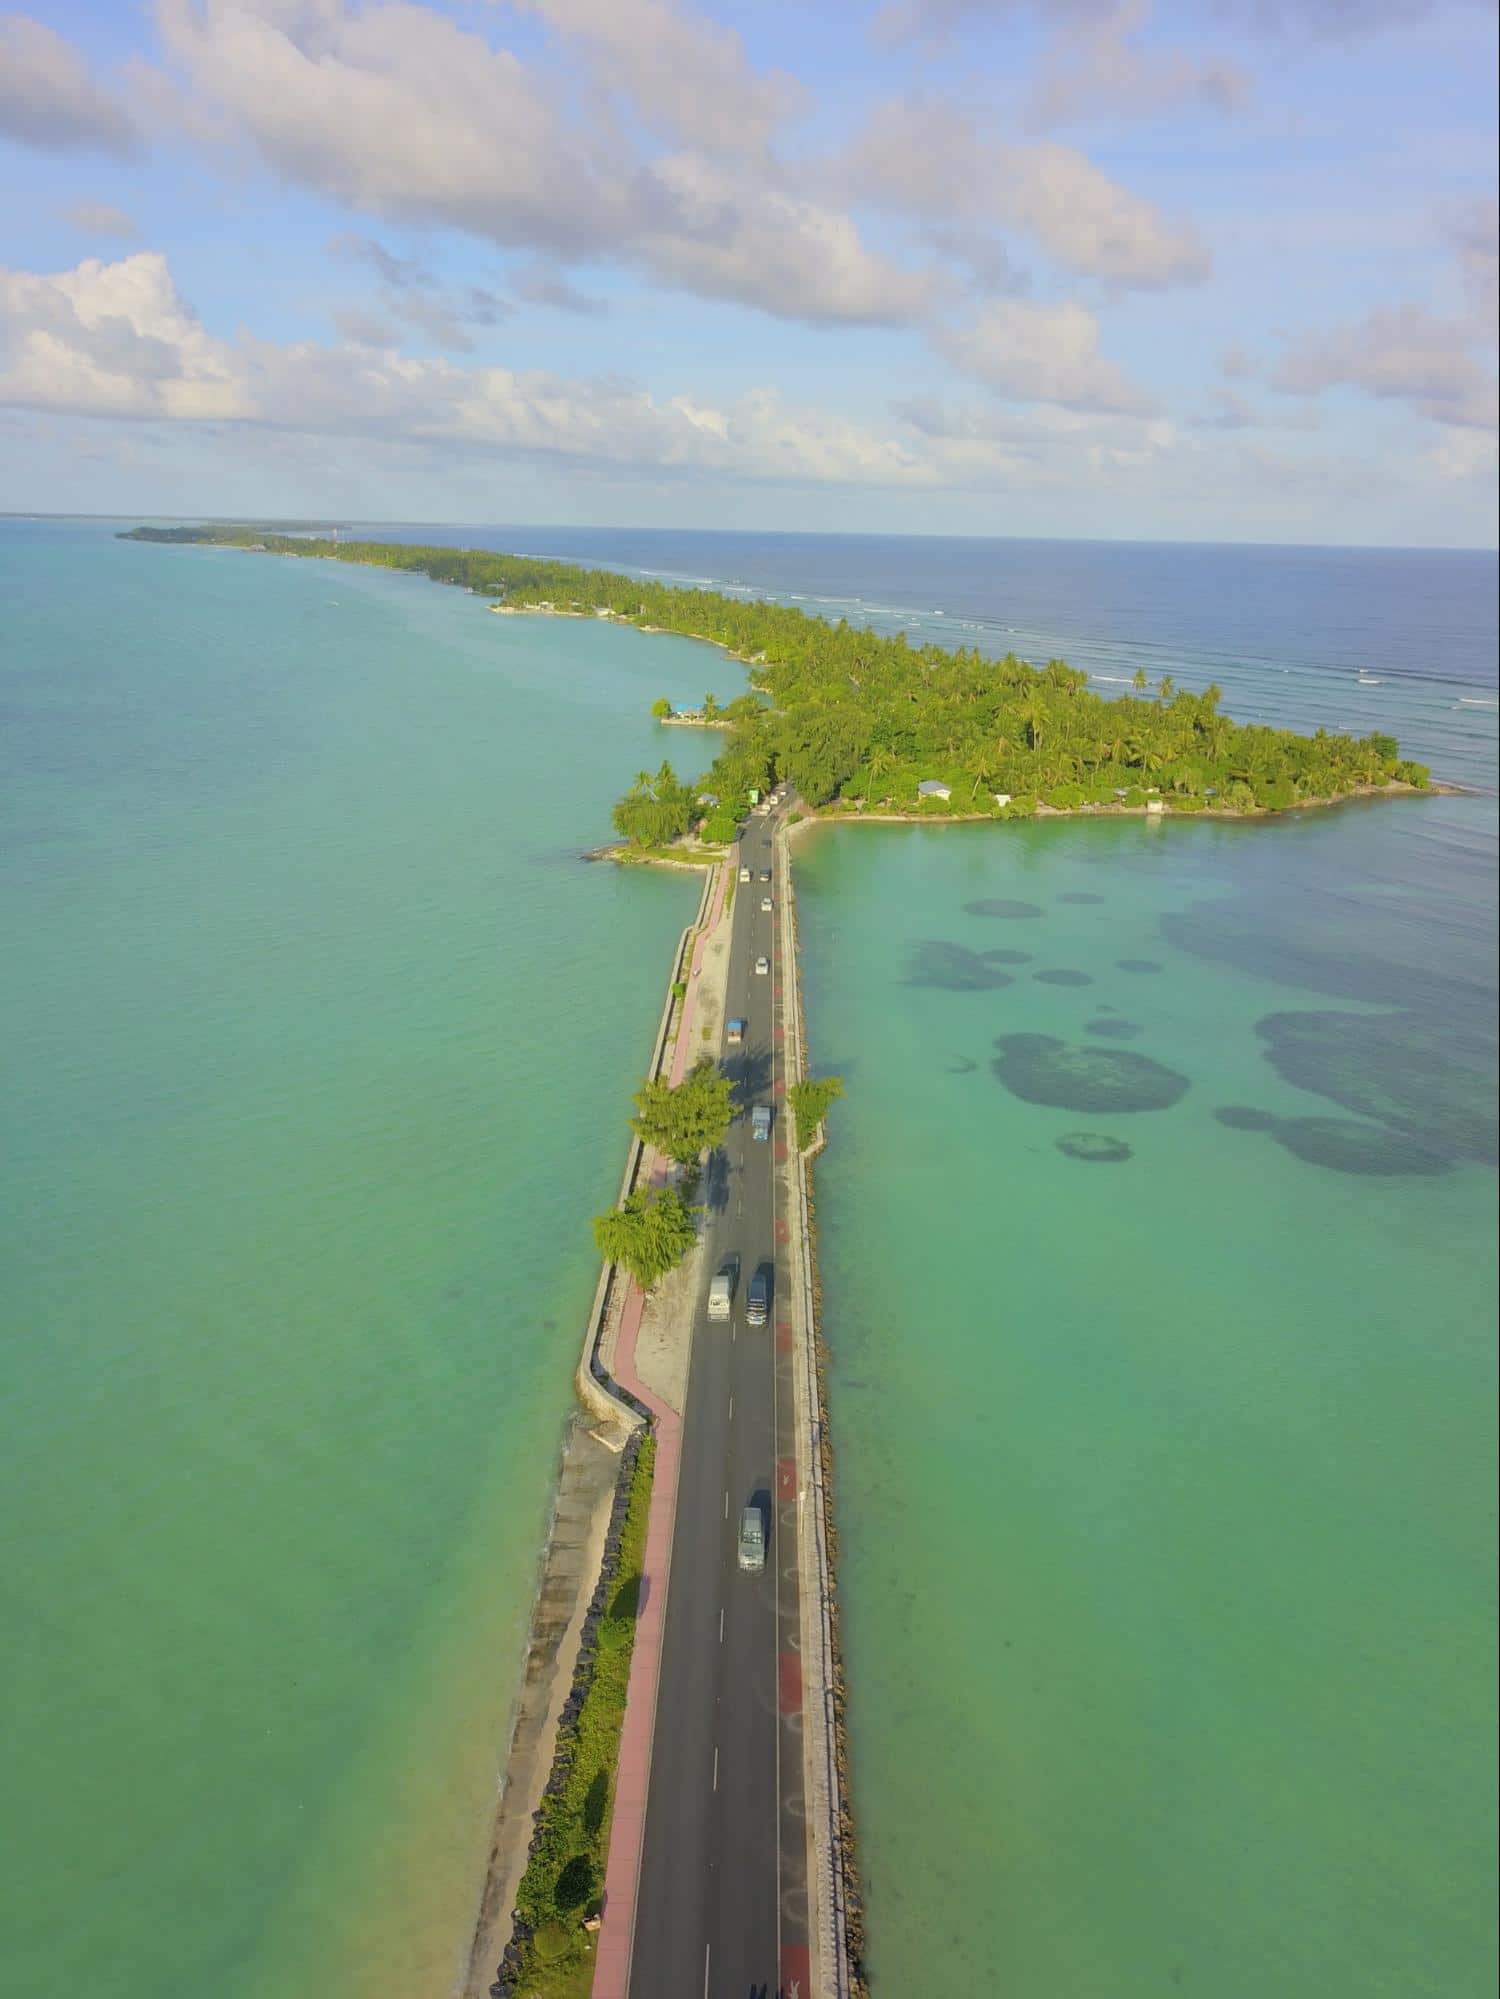 One of the recently constructed causeways in Kiribati